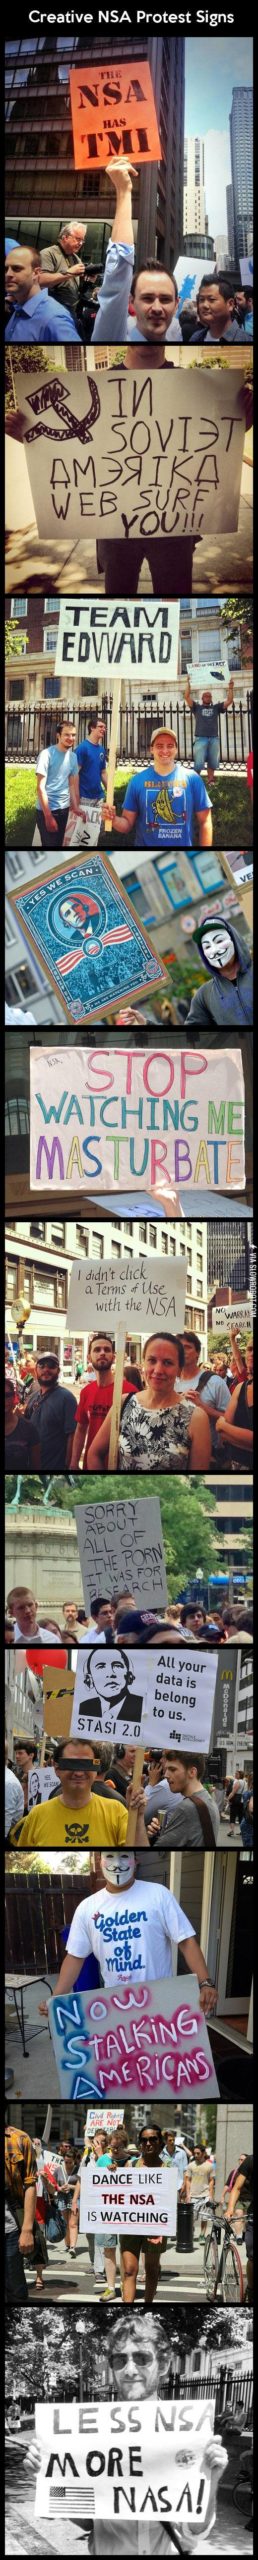 NSA+protest+signs.